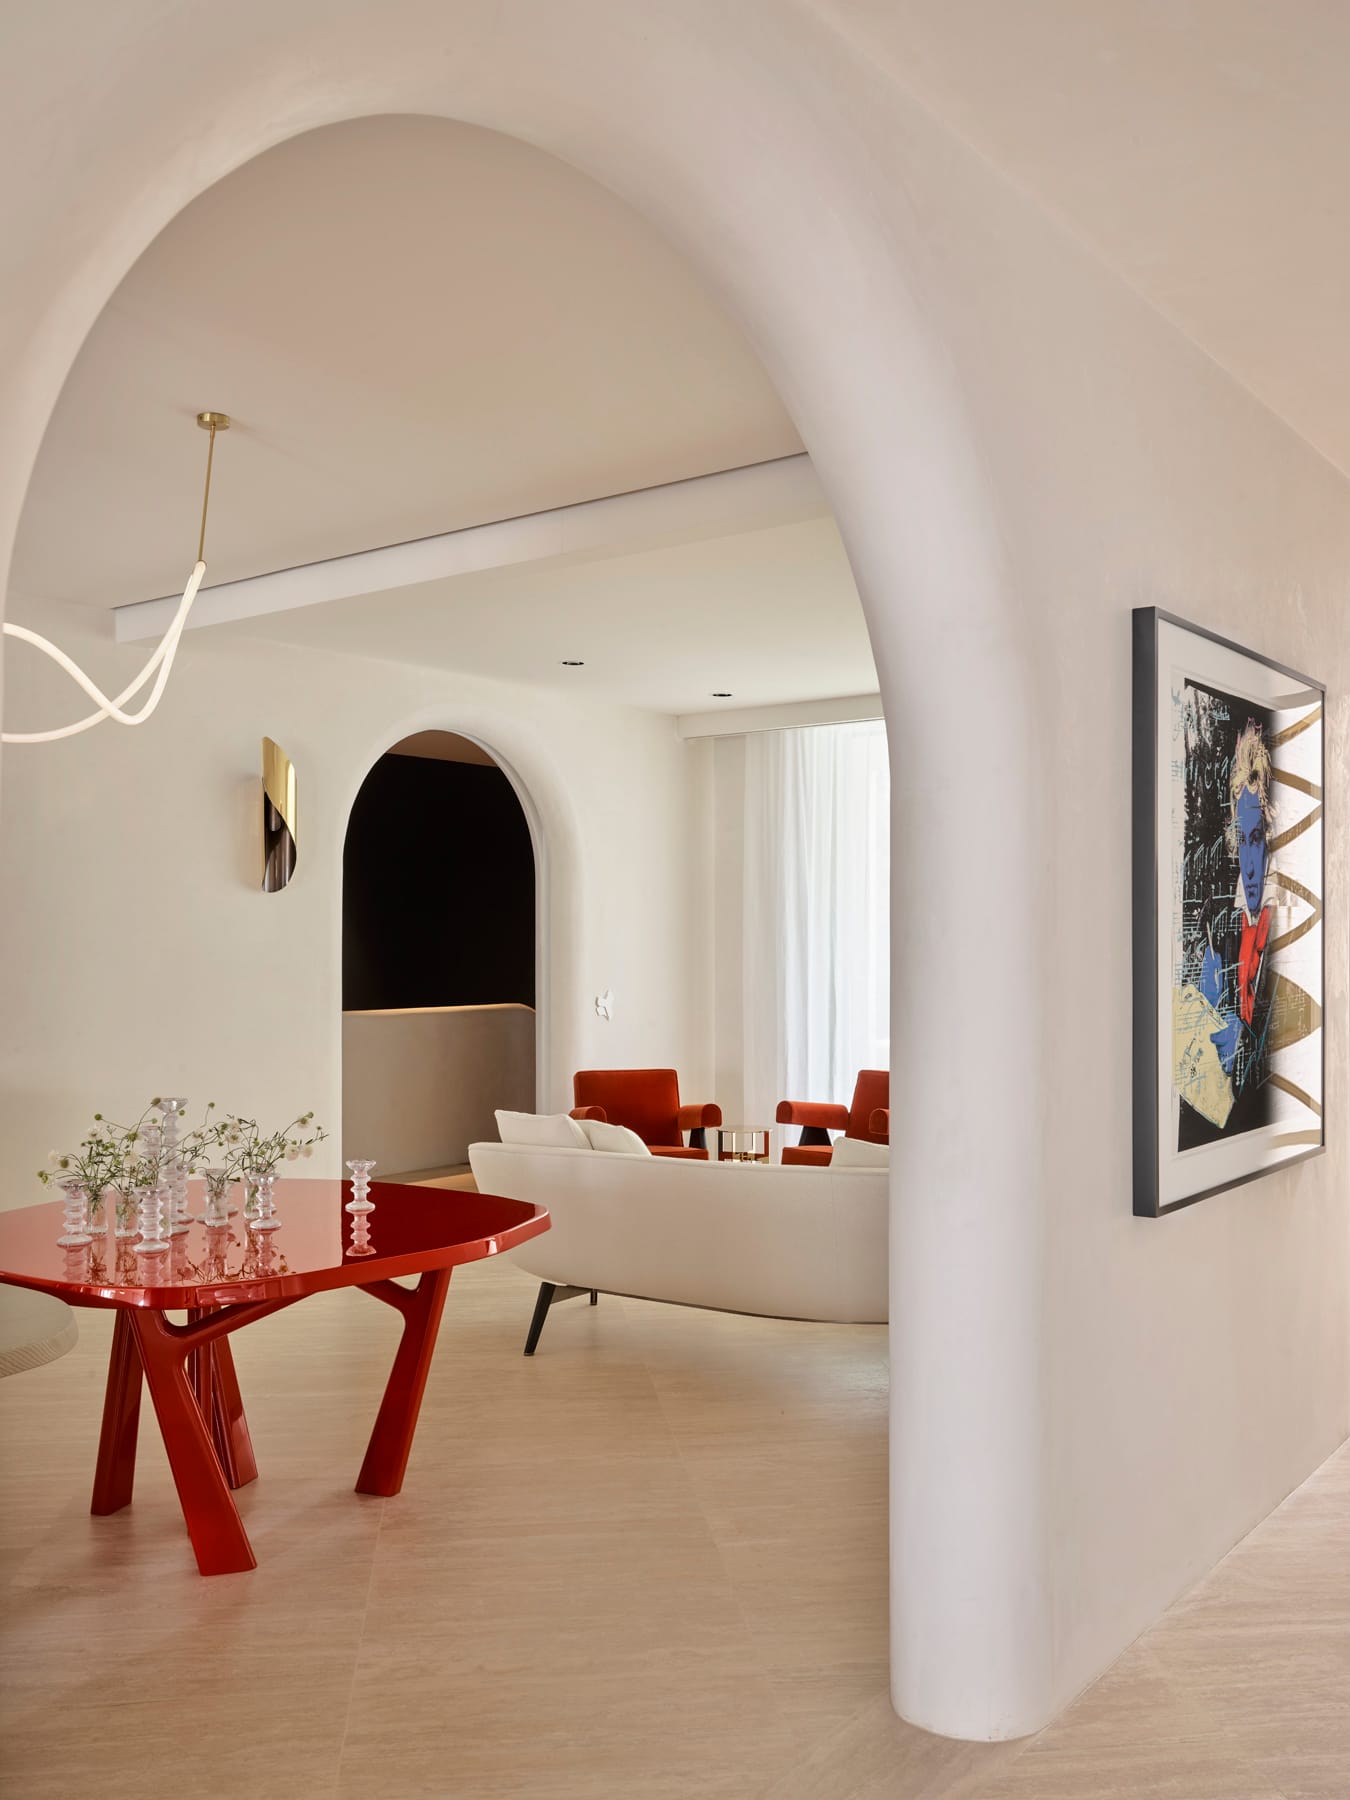 Toorak House 2 by K.P.D.O. Photography by Sharyn Cairns. Large archway leading to sitting room. Red table. White couch and red armchairs. White plaster walls. 